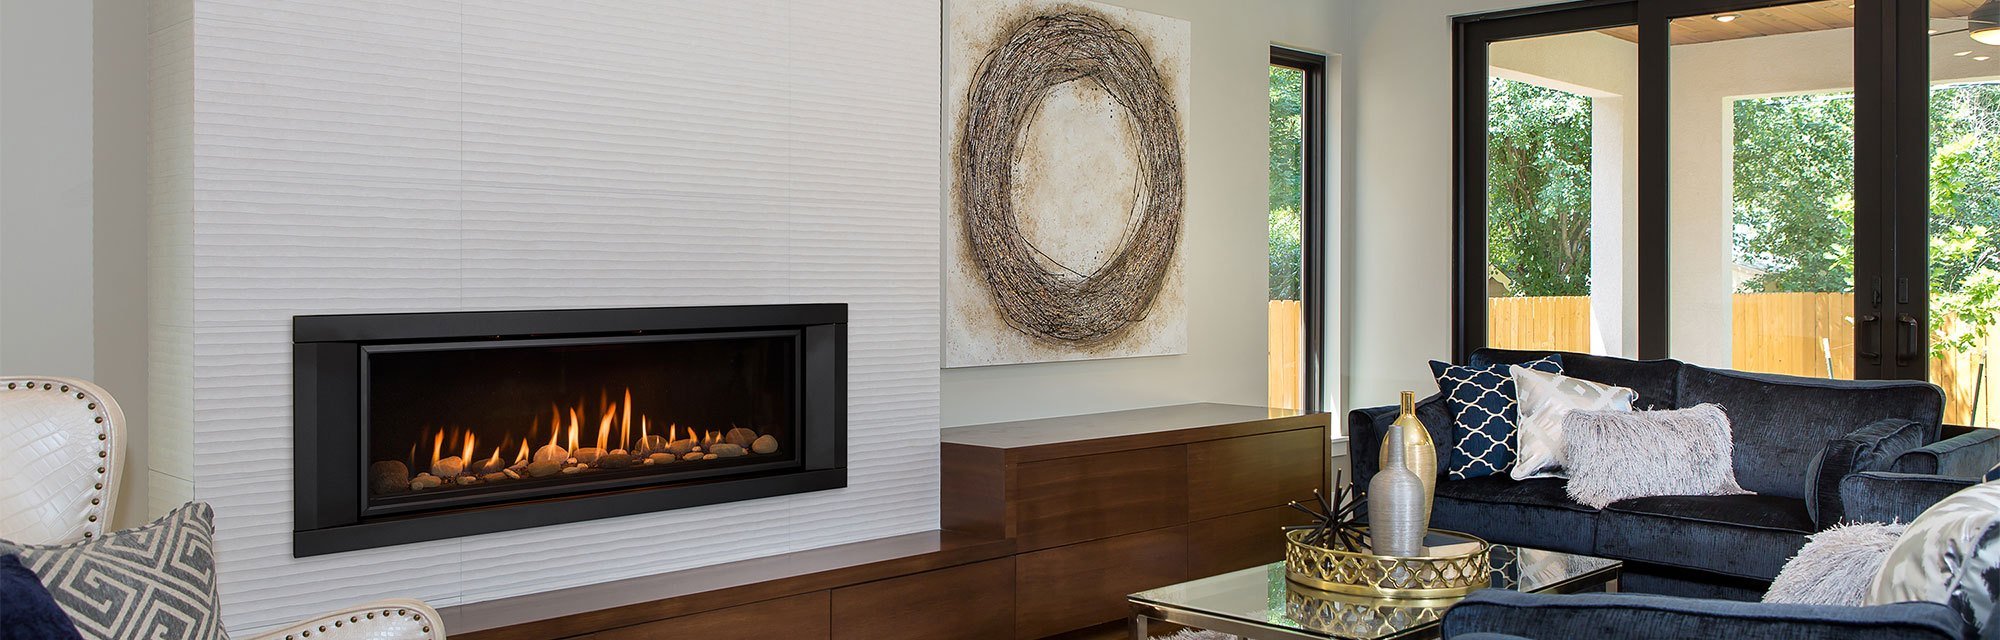 Electric Fireplace Dealers Near Me | Electric Fireplace